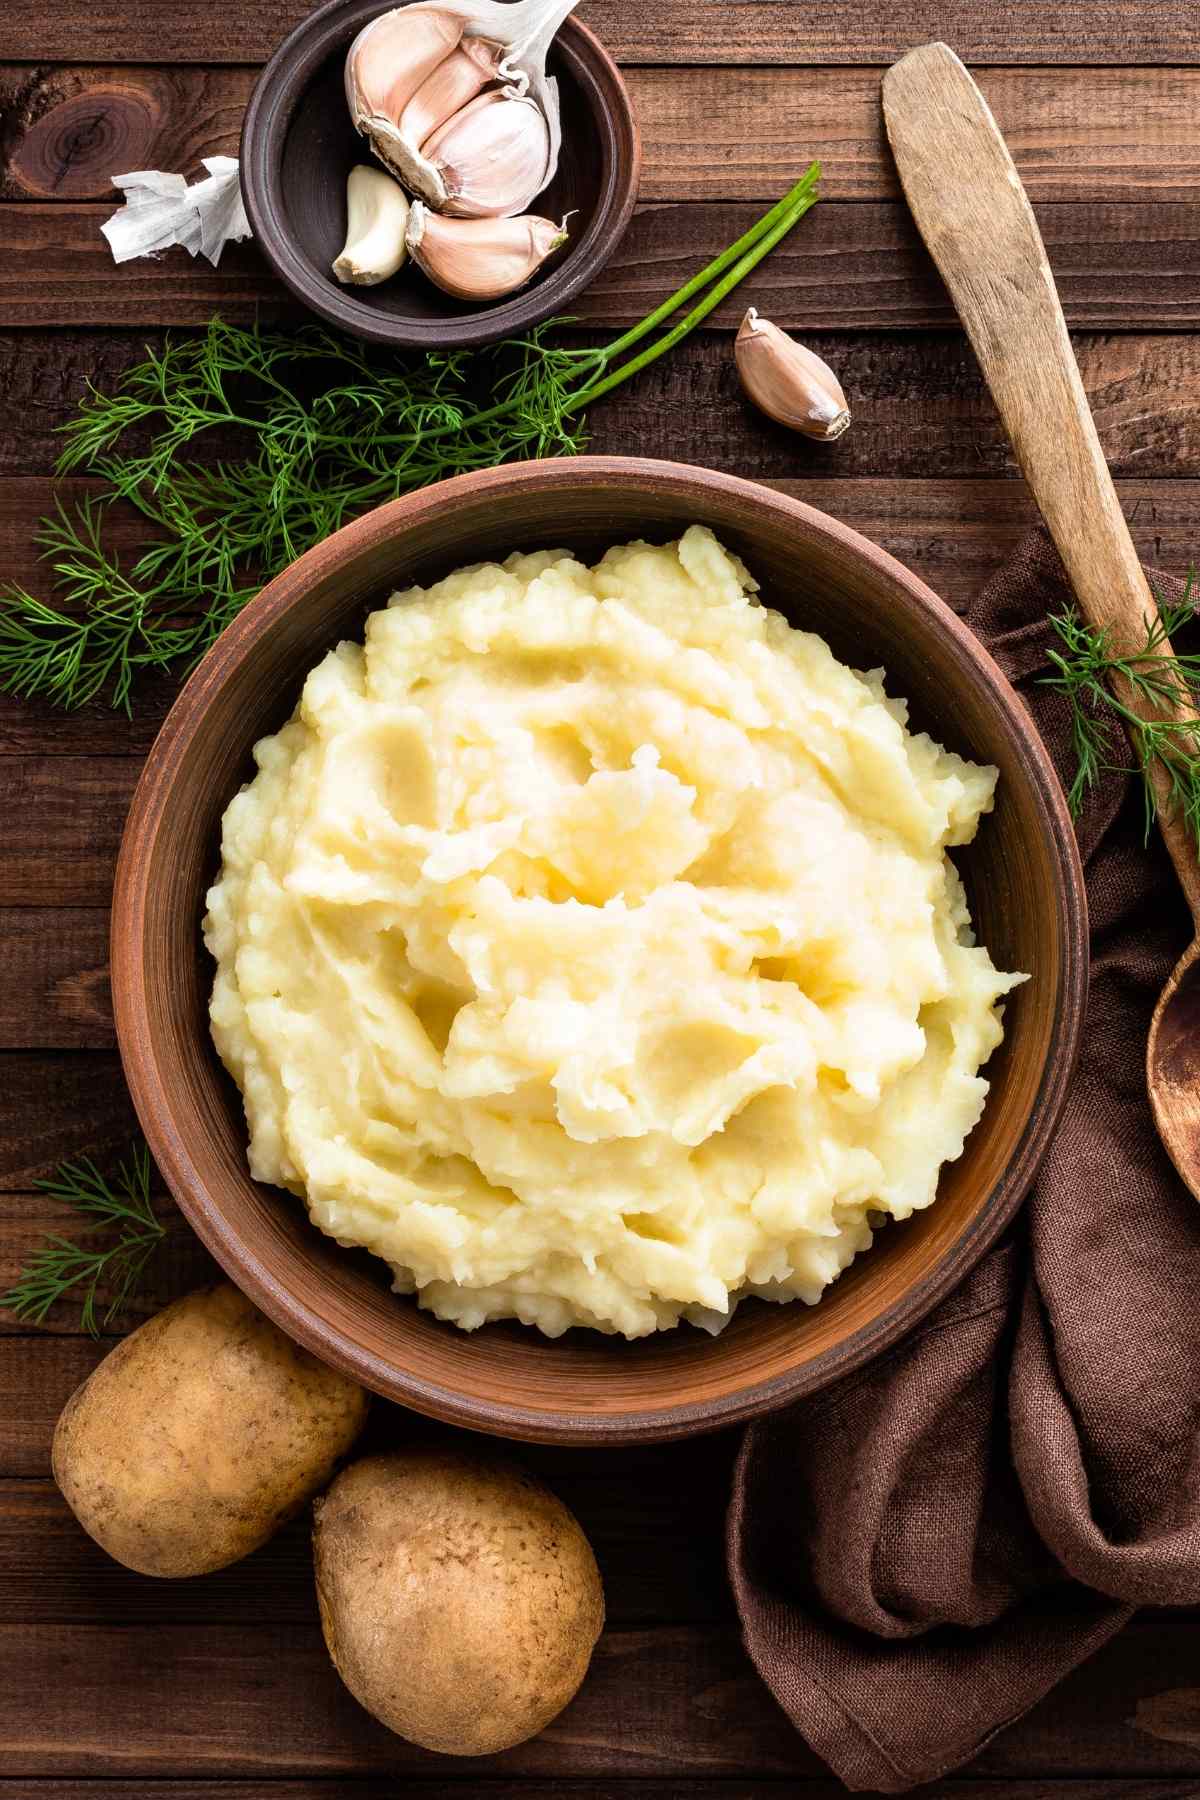 If you’re a fan of the mashed potatoes at Popeyes, this copycat recipe is just what you need. The mashed potatoes are light, fluffy, and full of delicious flavor.